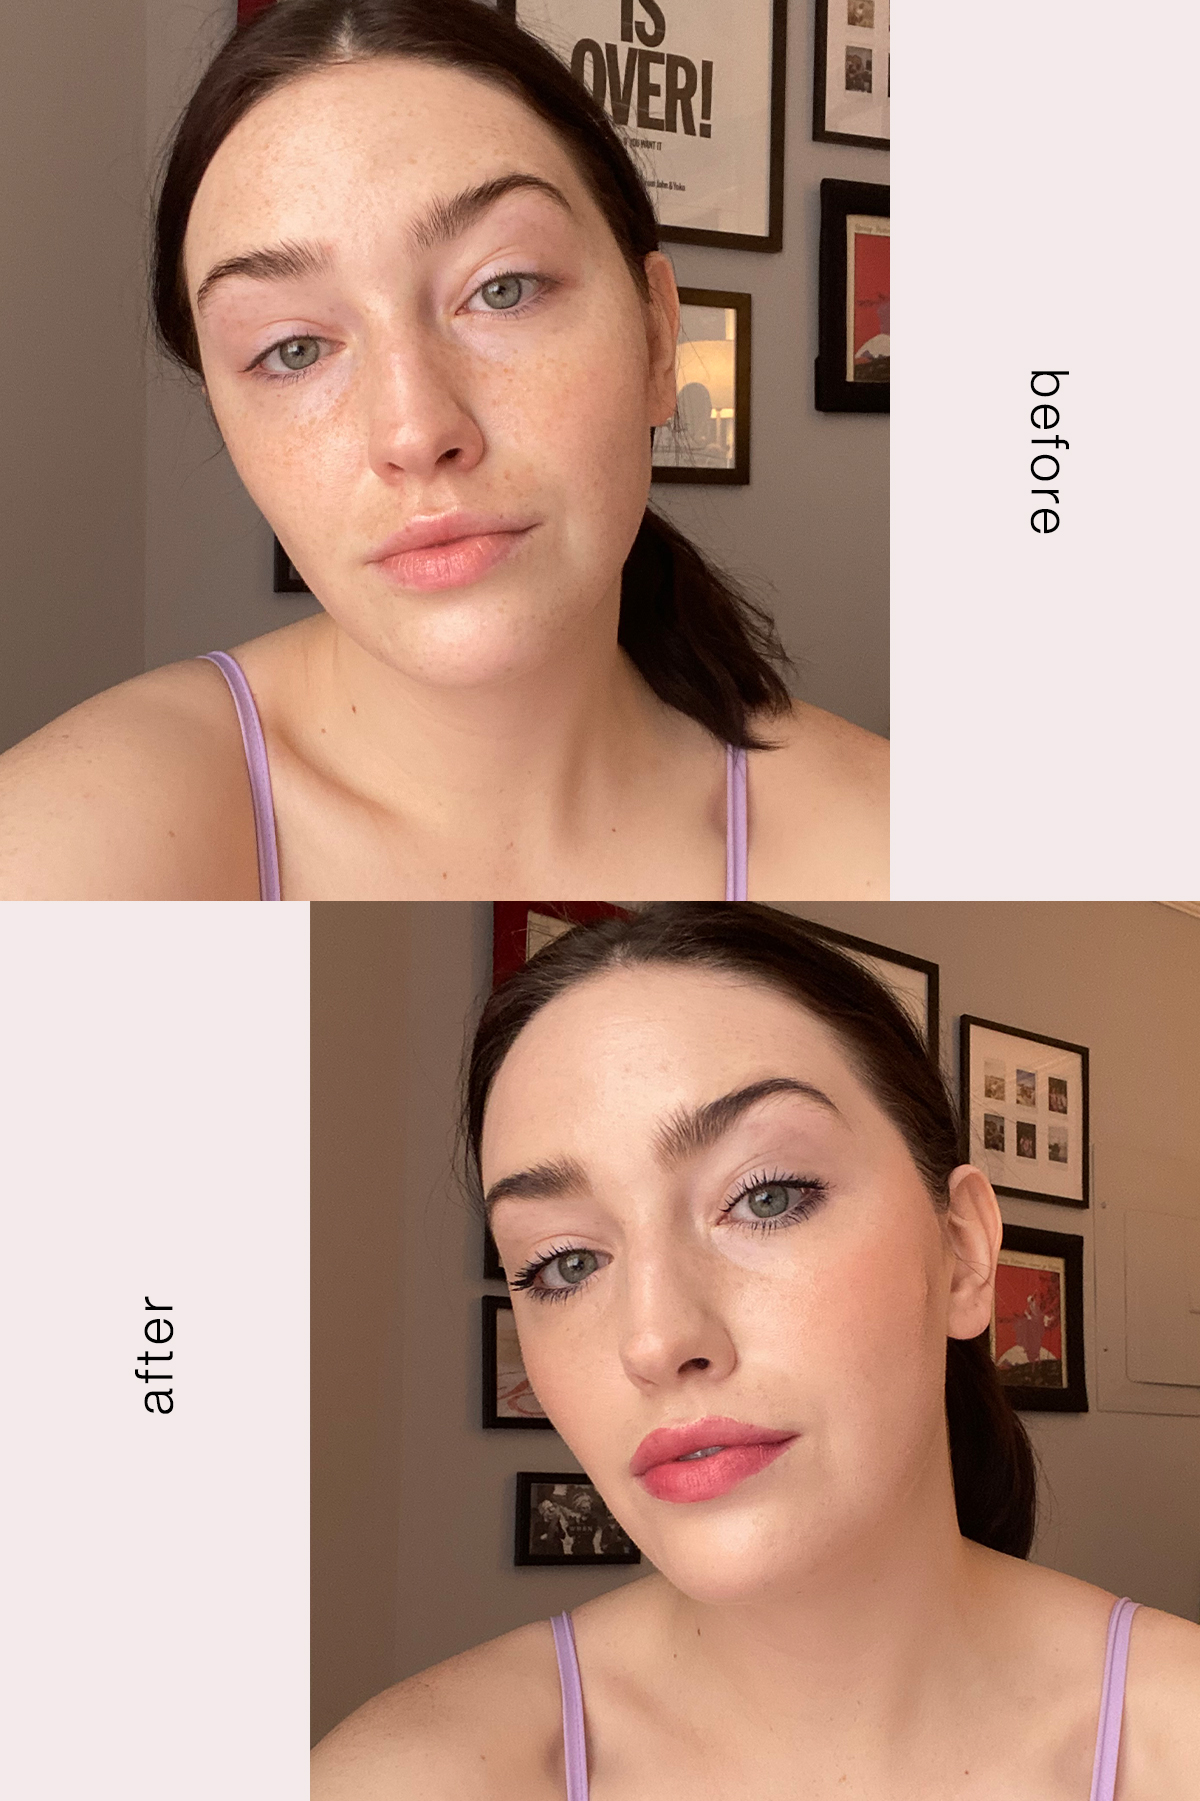 Foundation Review & Wear-Test • Makeup Forever: HD Skin (review in